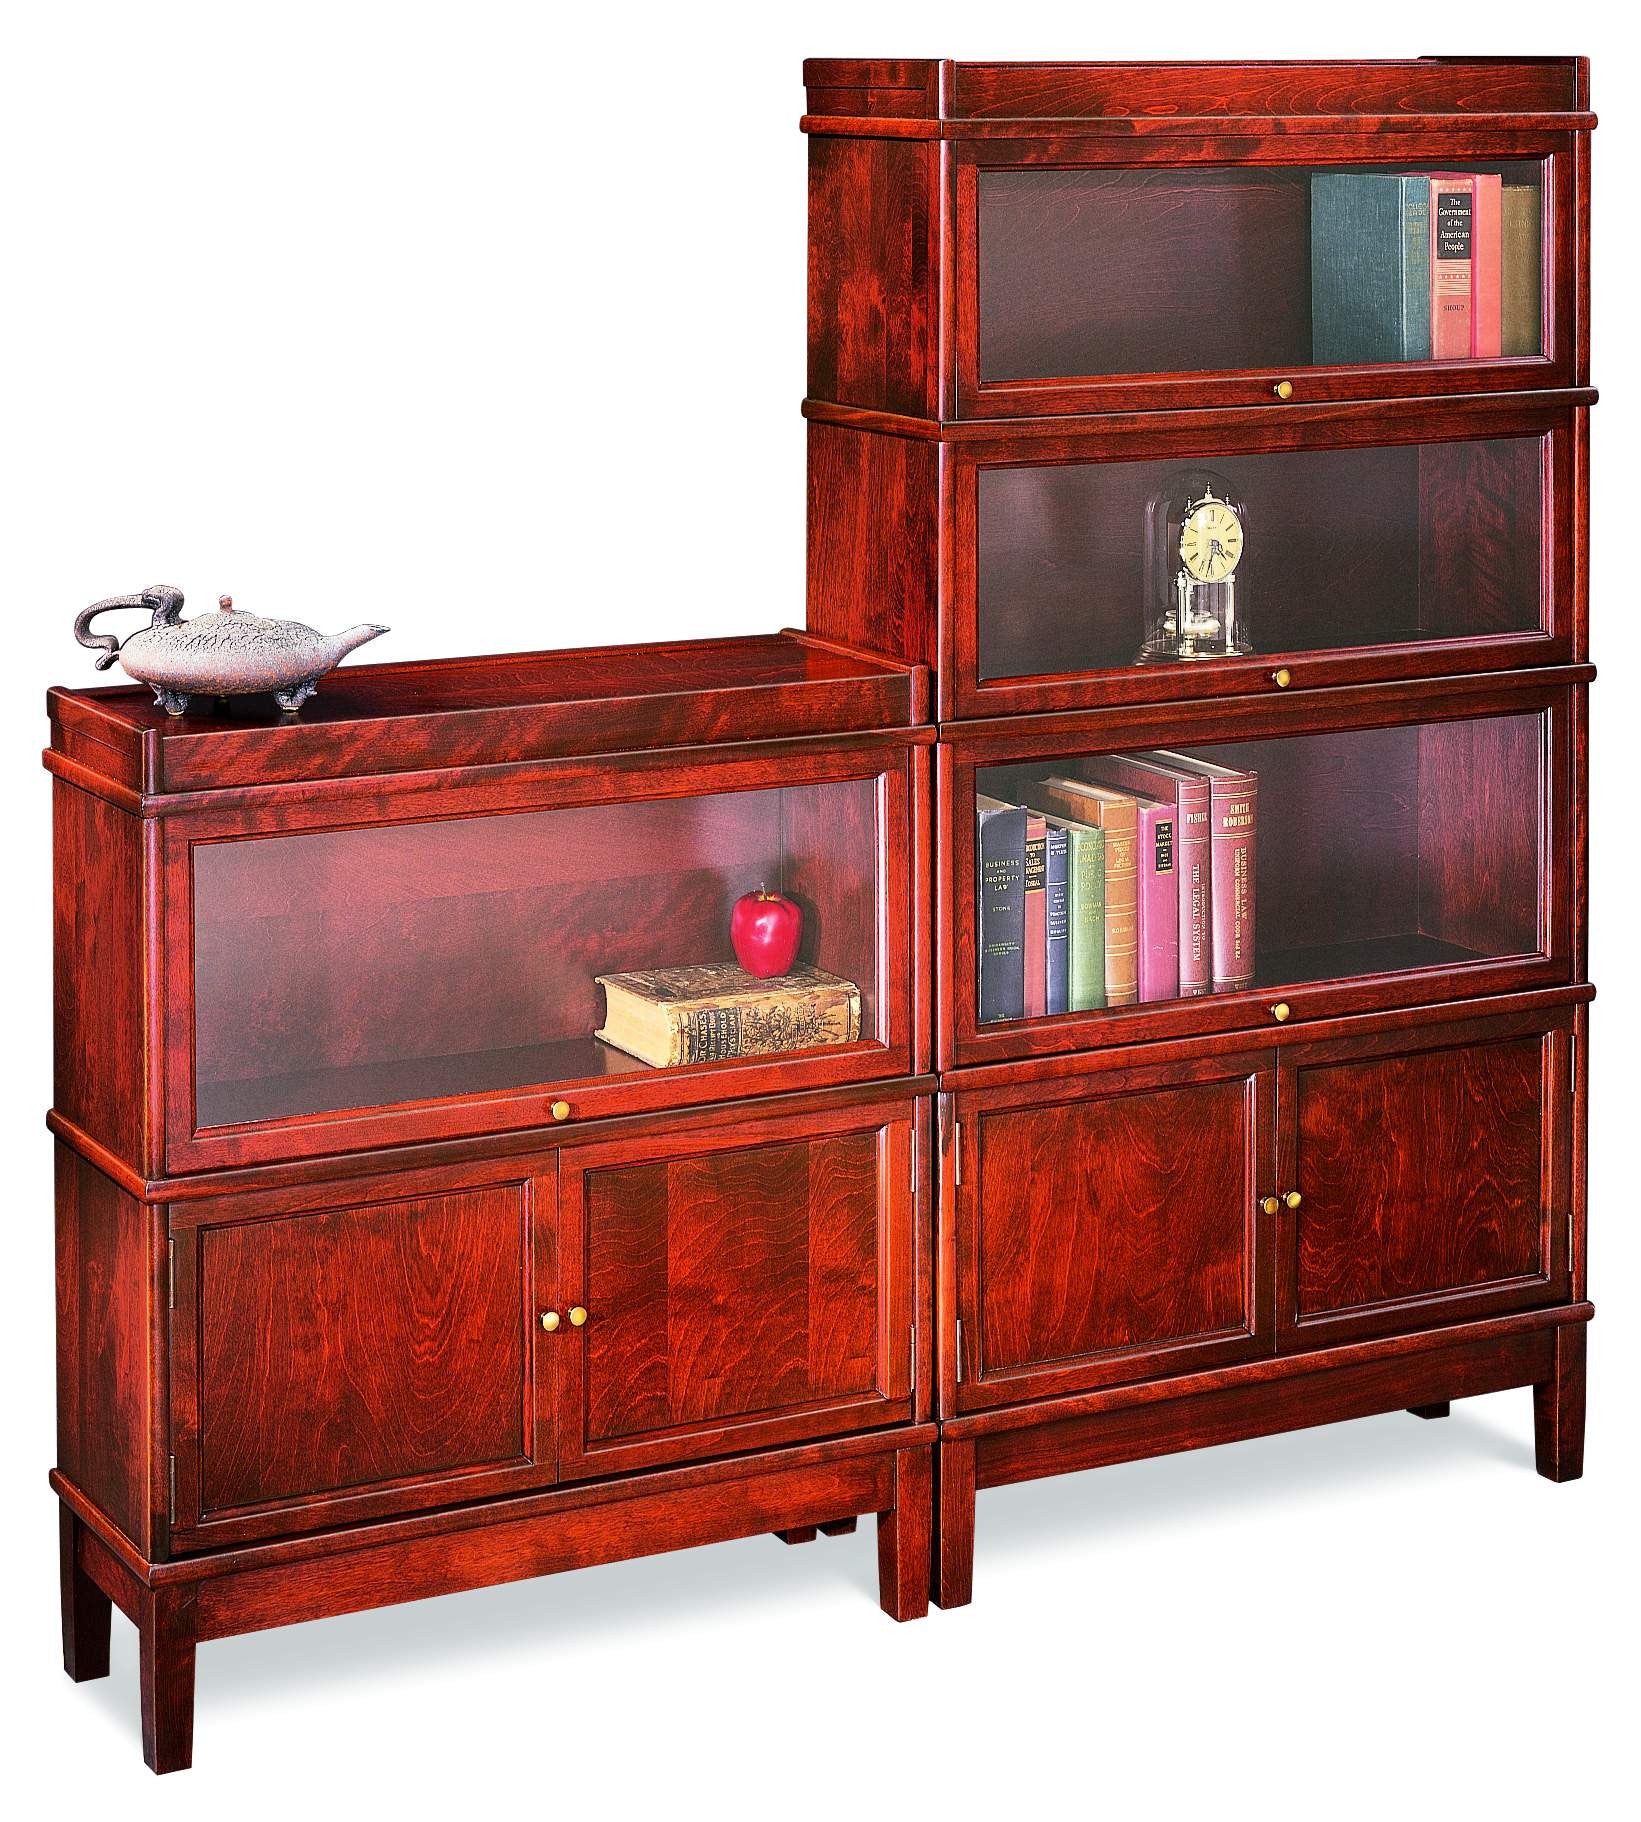 31515DD Extra Deep Cabinet Double Door Section - Hale Barrister Bookcases